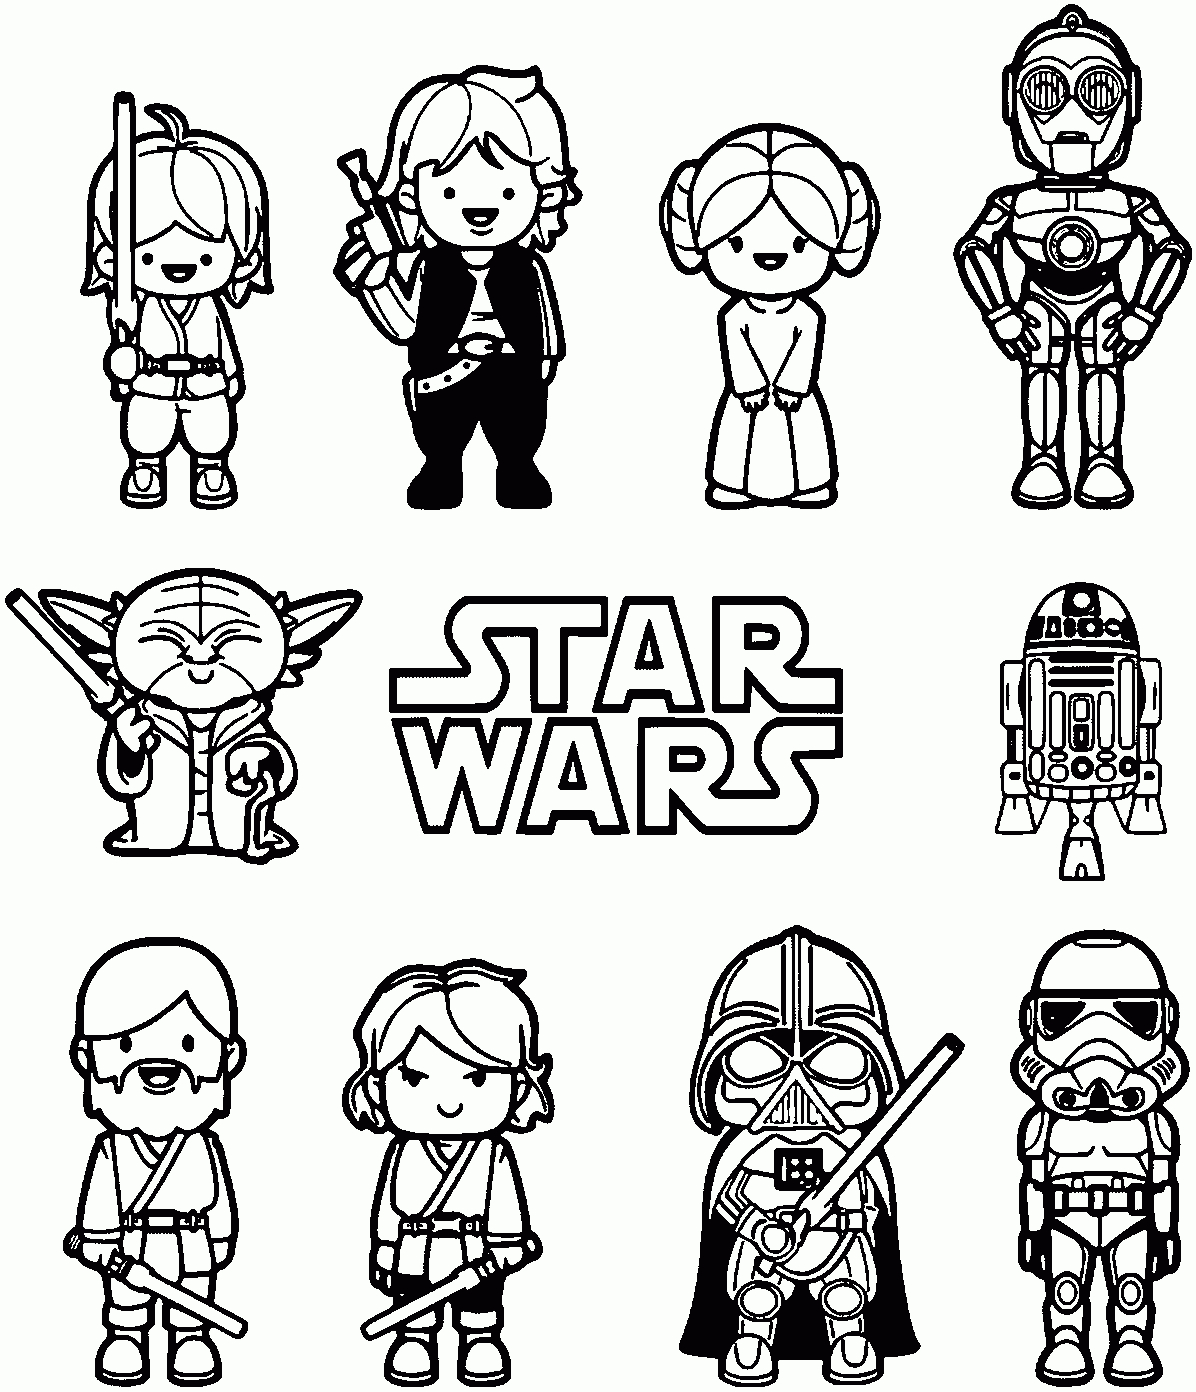 Star-Wars-Coloring-Pages-Luke-Skywalker-Star-Wars-Coloring-Pages - Free Printable Star Wars Coloring Pages